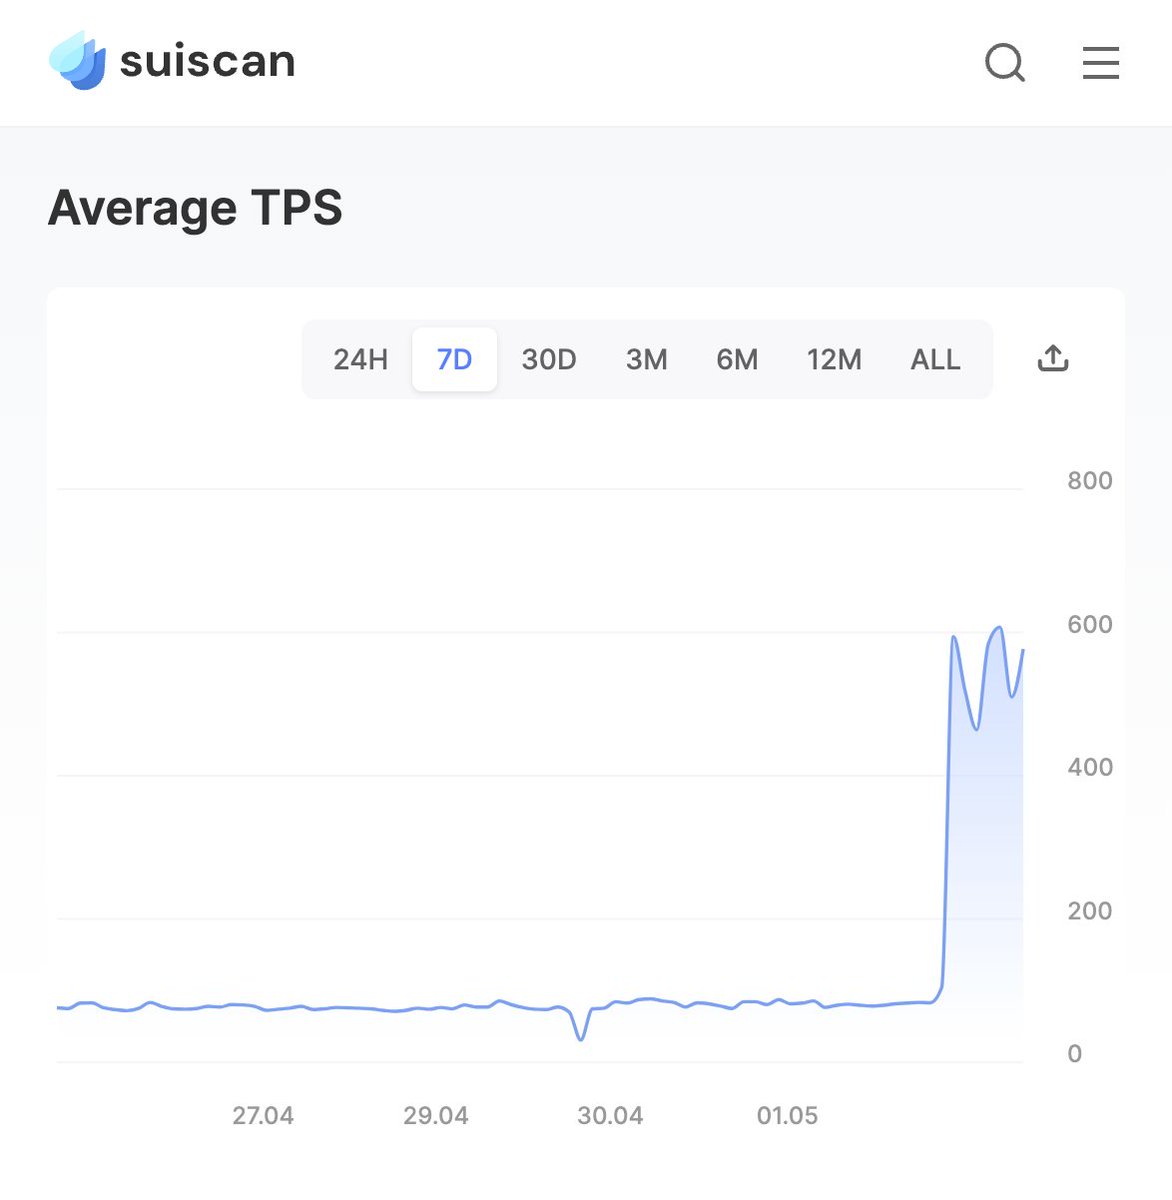 Breaking news!

🚫 SPAM TRANSACTIONS GONE WILD

🌊 SUI NETWORK REMAINS UNFAZED

Miners sent over 16 MILLION transactions so far, and it's only been a few hours! 🤯

SPAM is doing more txs than all other Sui packages combined

Meanwhile, Sui Network is chugging along like nothing…